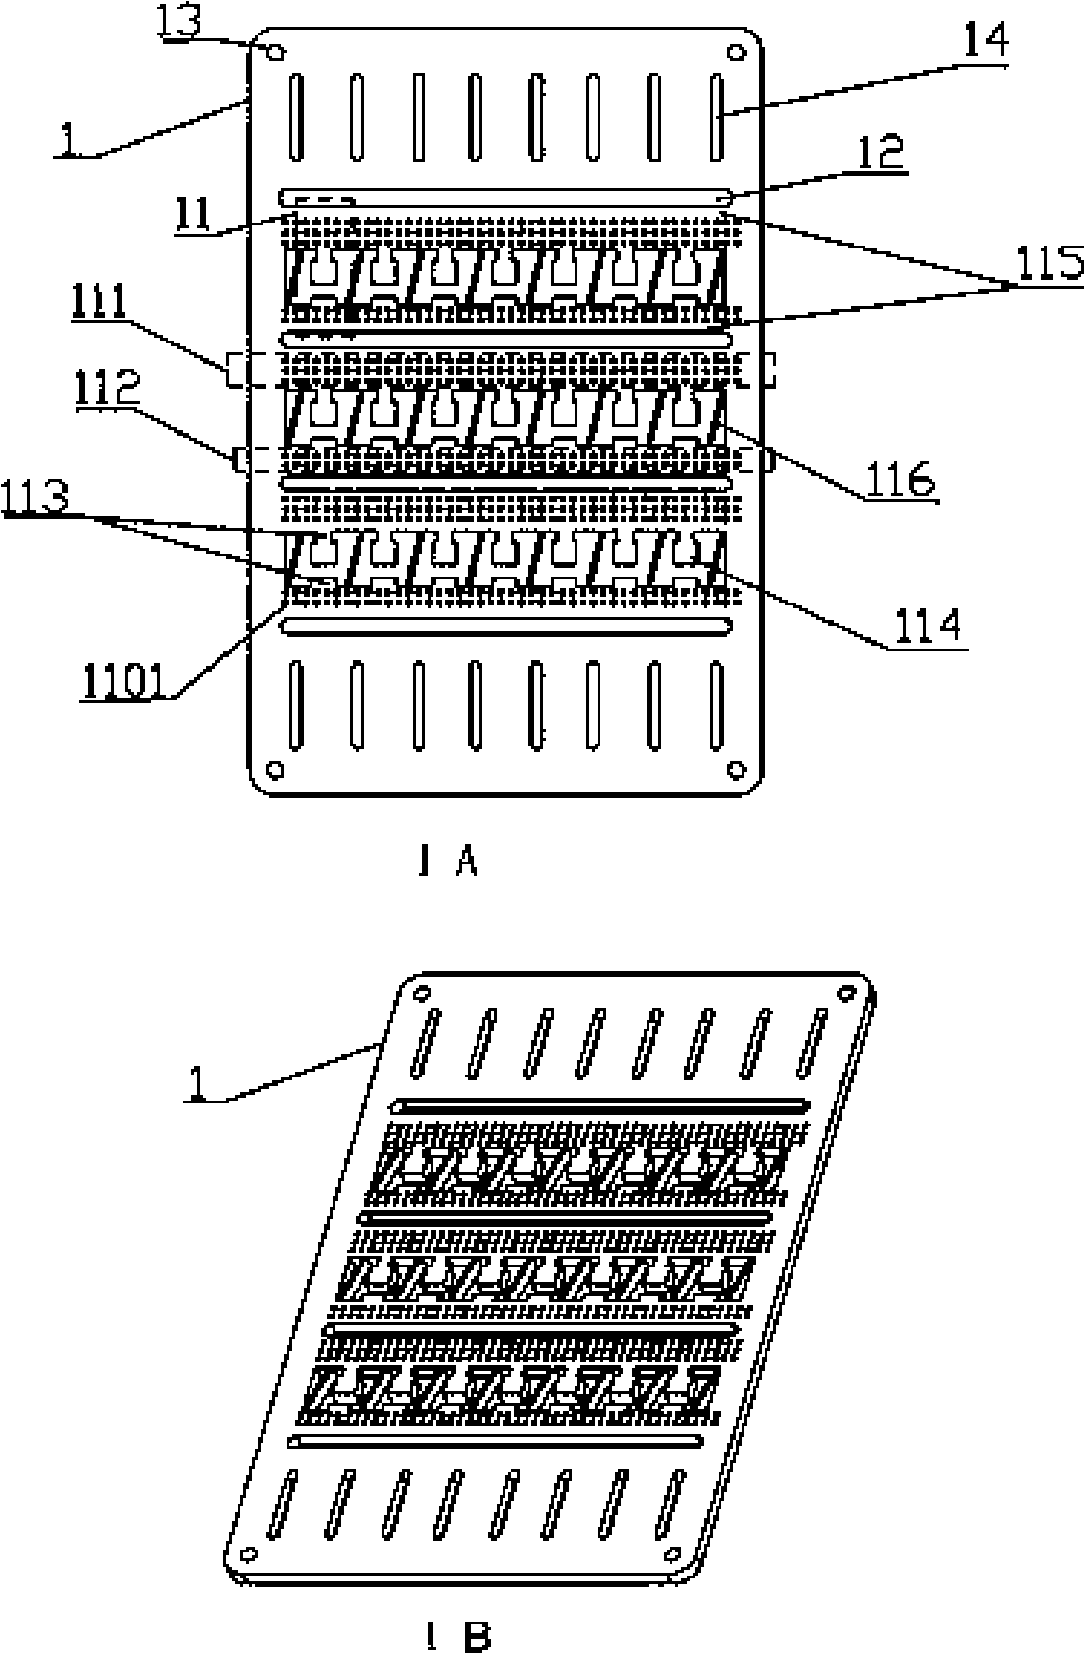 Platy LED metal substrate, platy LED light emitting device and manufacturing method thereof